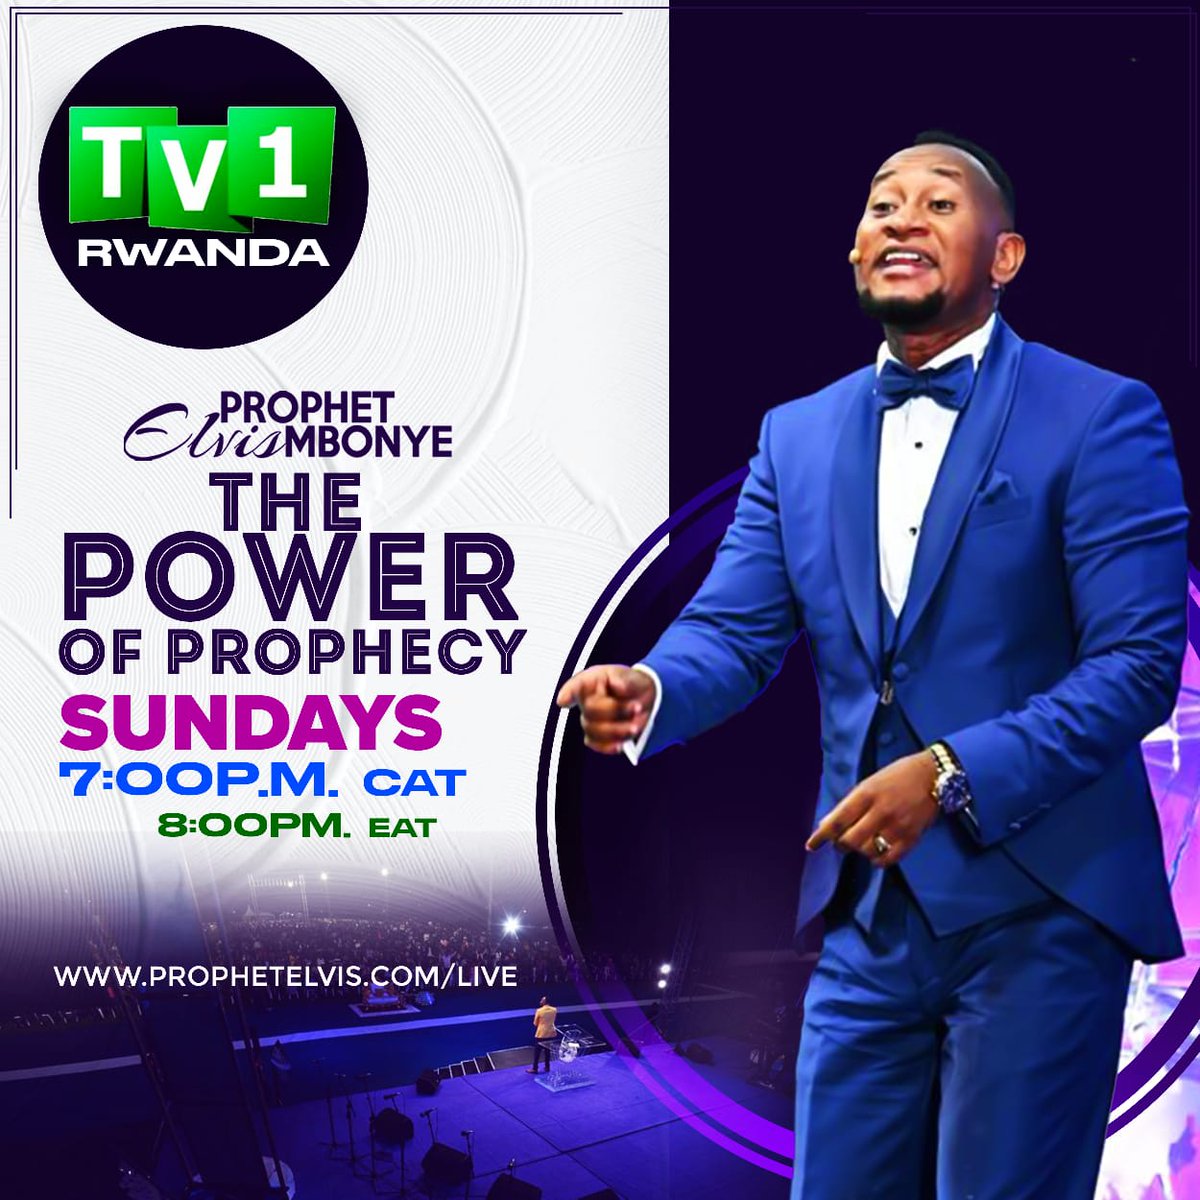 𝗧𝗛𝗘 𝗣𝗢𝗪𝗘𝗥 𝗢𝗙 𝗣𝗥𝗢𝗣𝗛𝗘𝗖𝗬. Prophet Elvis Mbonye in an epic broadcast Sunday 28th April 2024 at 7pm on TV1.